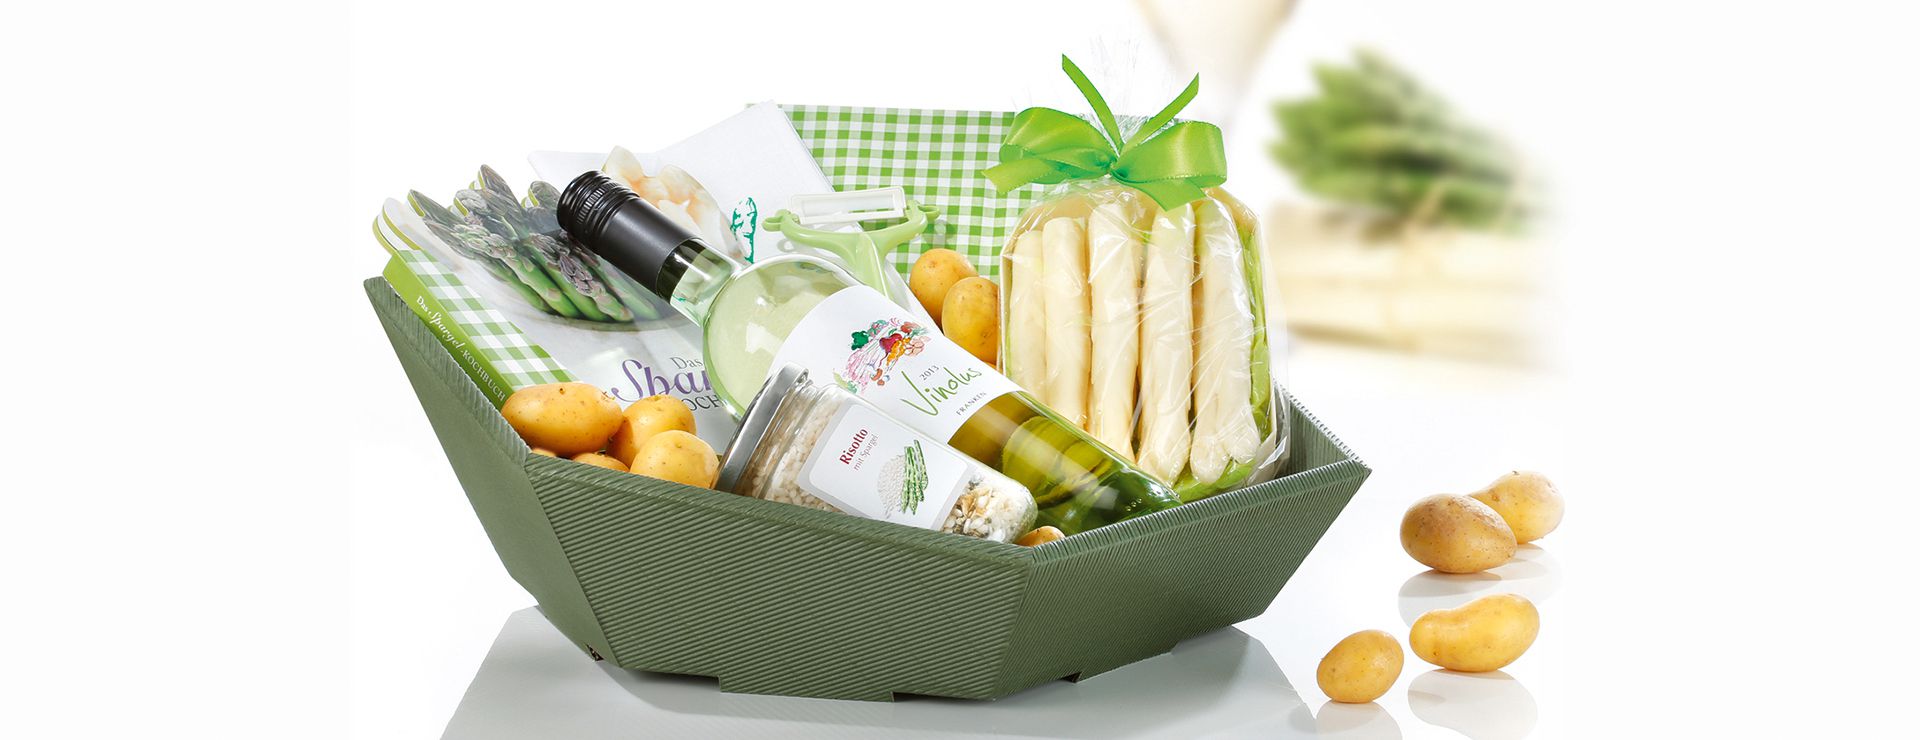 Bevel hexagonal gift basket in open face board with white wine and asparagus